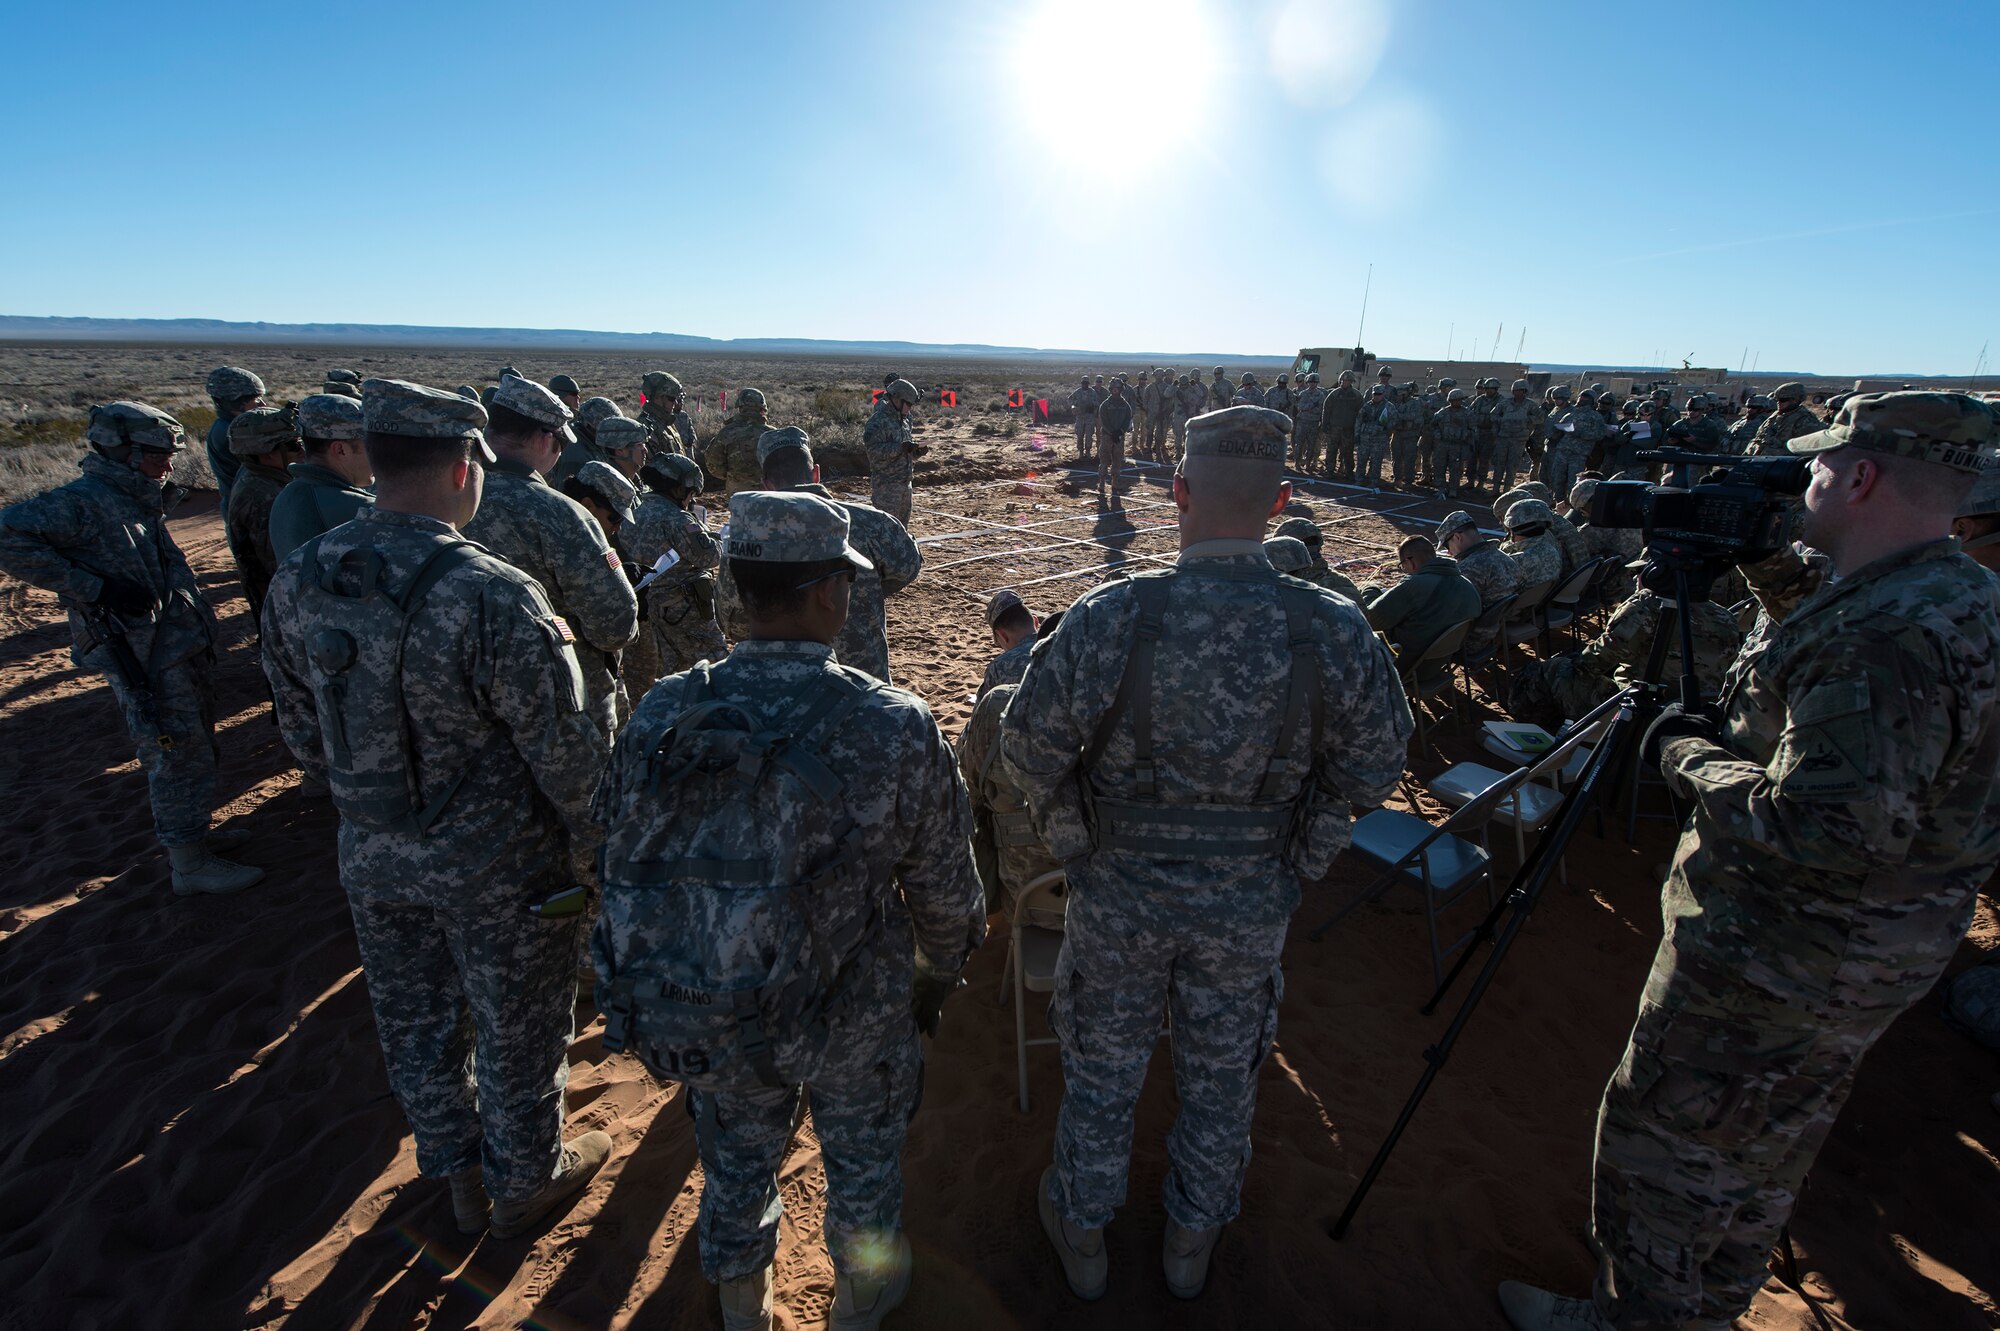 U.S. Army Soldiers and U.S. Air Force Airmen are briefed prior to beginning a rehearsal for exercise Iron Focus, Feb. 4, 2016, at the Oro Grande Training Complex at Fort Bliss, Texas. During the exercise, Airmen and Soldiers were evaluated through various Situation Training Exercises, which are short, scenario-driven, mission-oriented exercises designed to train participants by creating a realistic scenario of a deployed military operation. (U.S. Air Force photo by Senior Airman Olivia Dominique/Released)